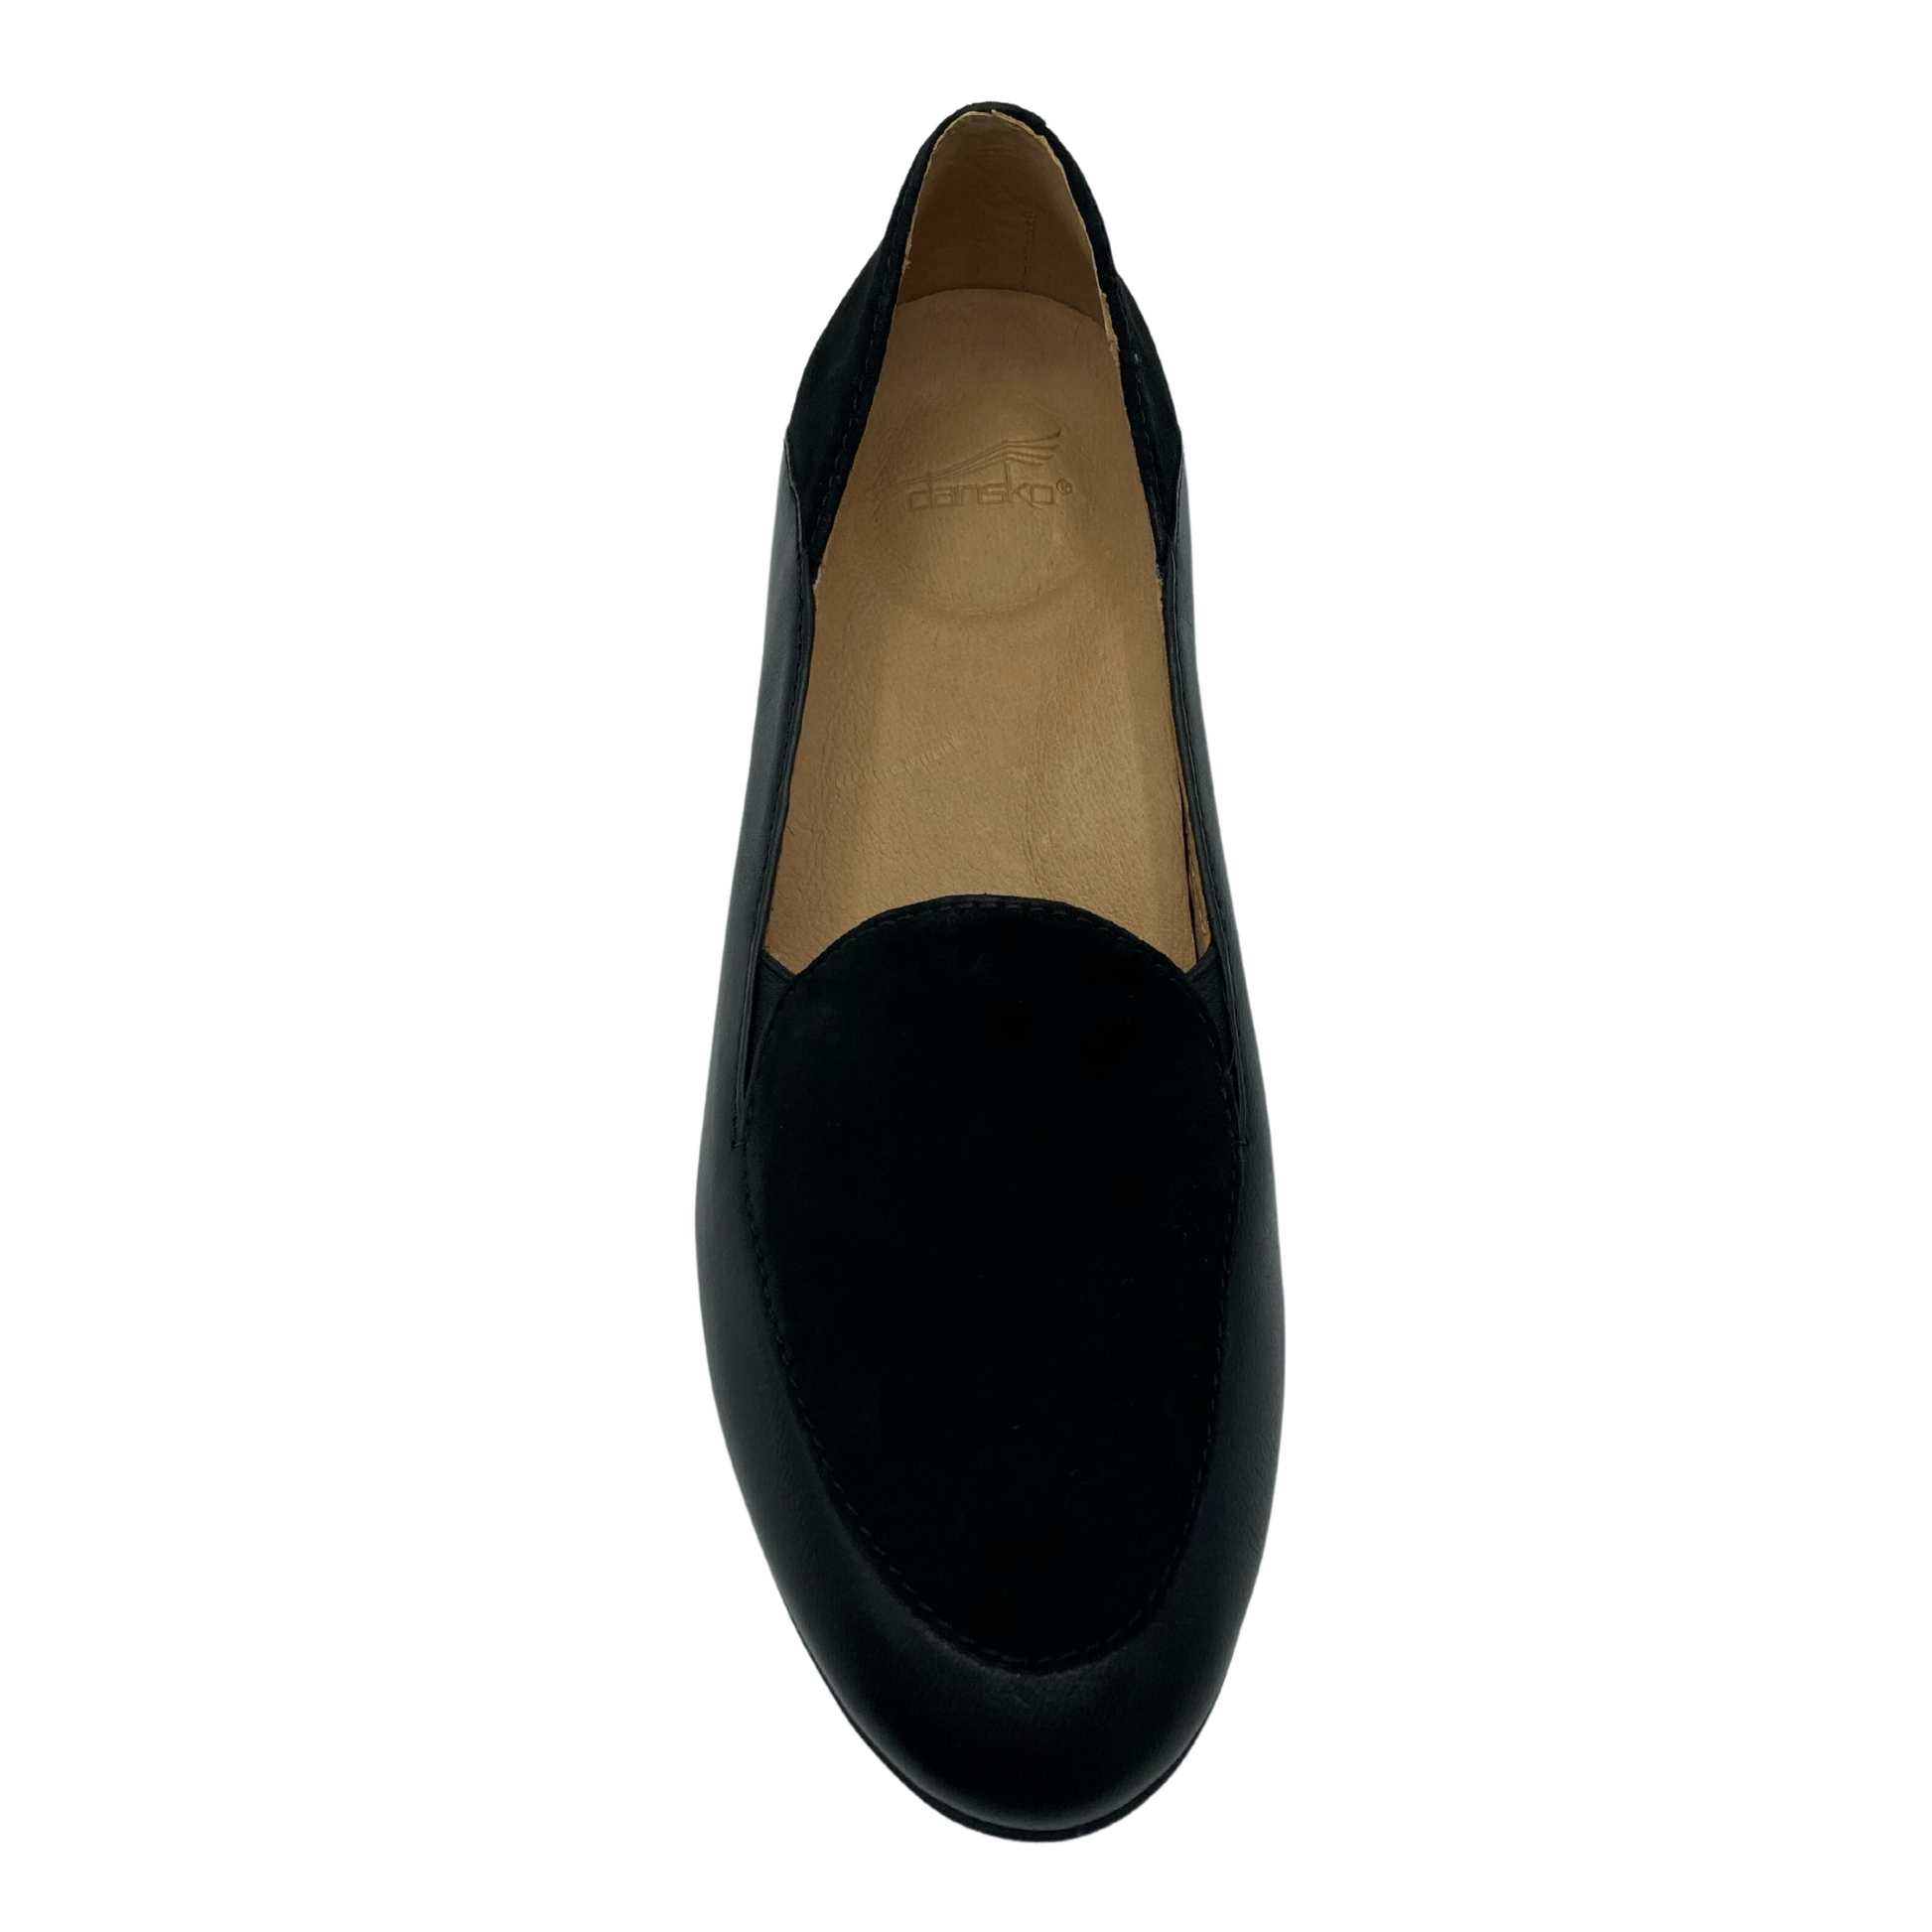 Top down view of black leather loafer with tan leather lining